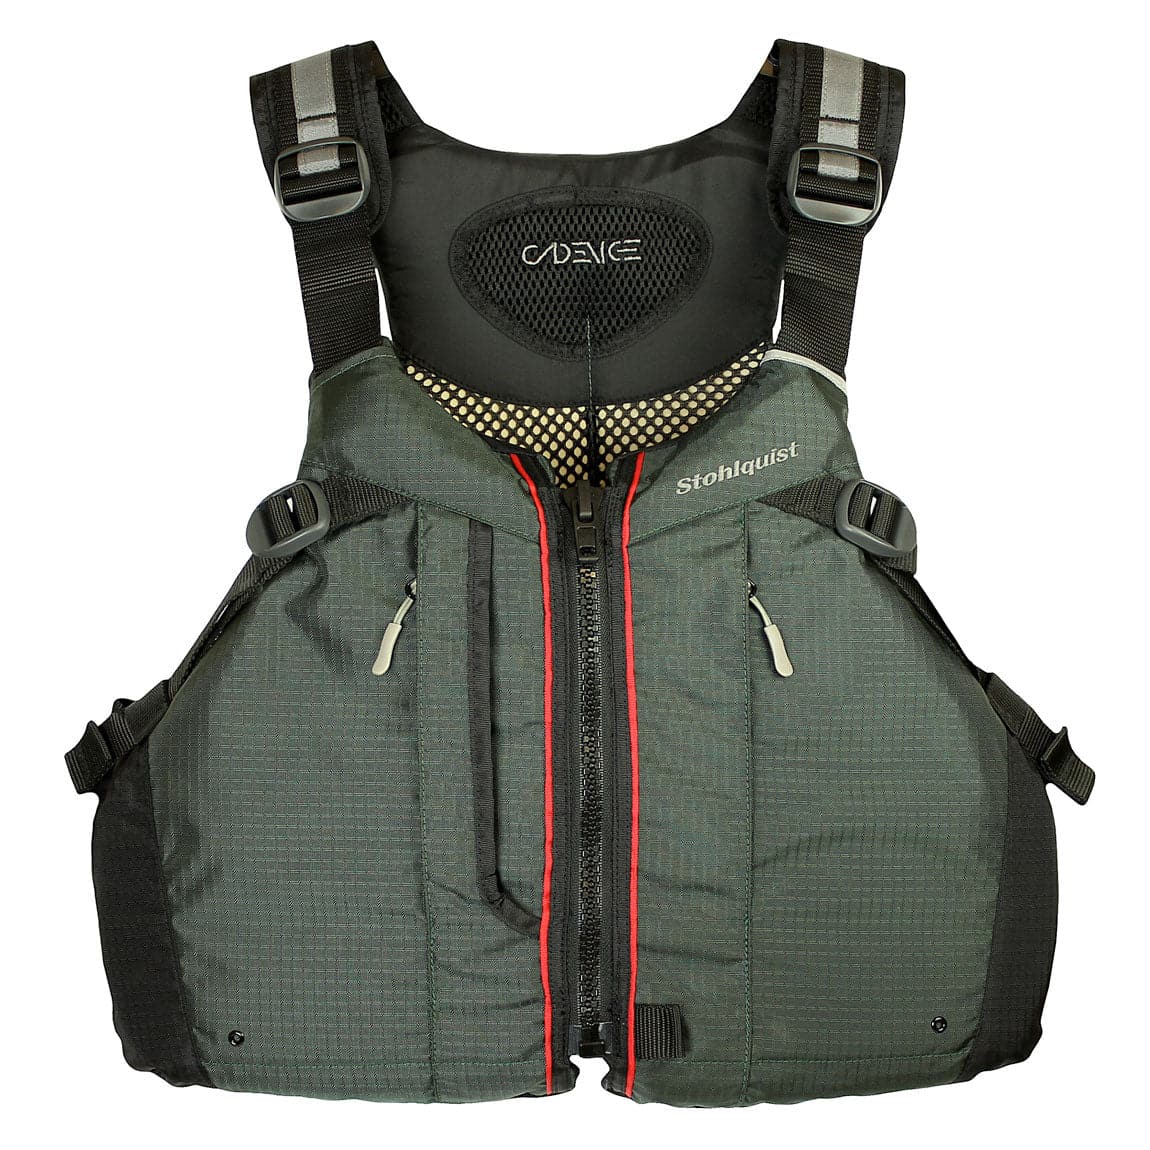 Featuring the Cadence PFD men's pfd manufactured by Stohlquist shown here from one angle.